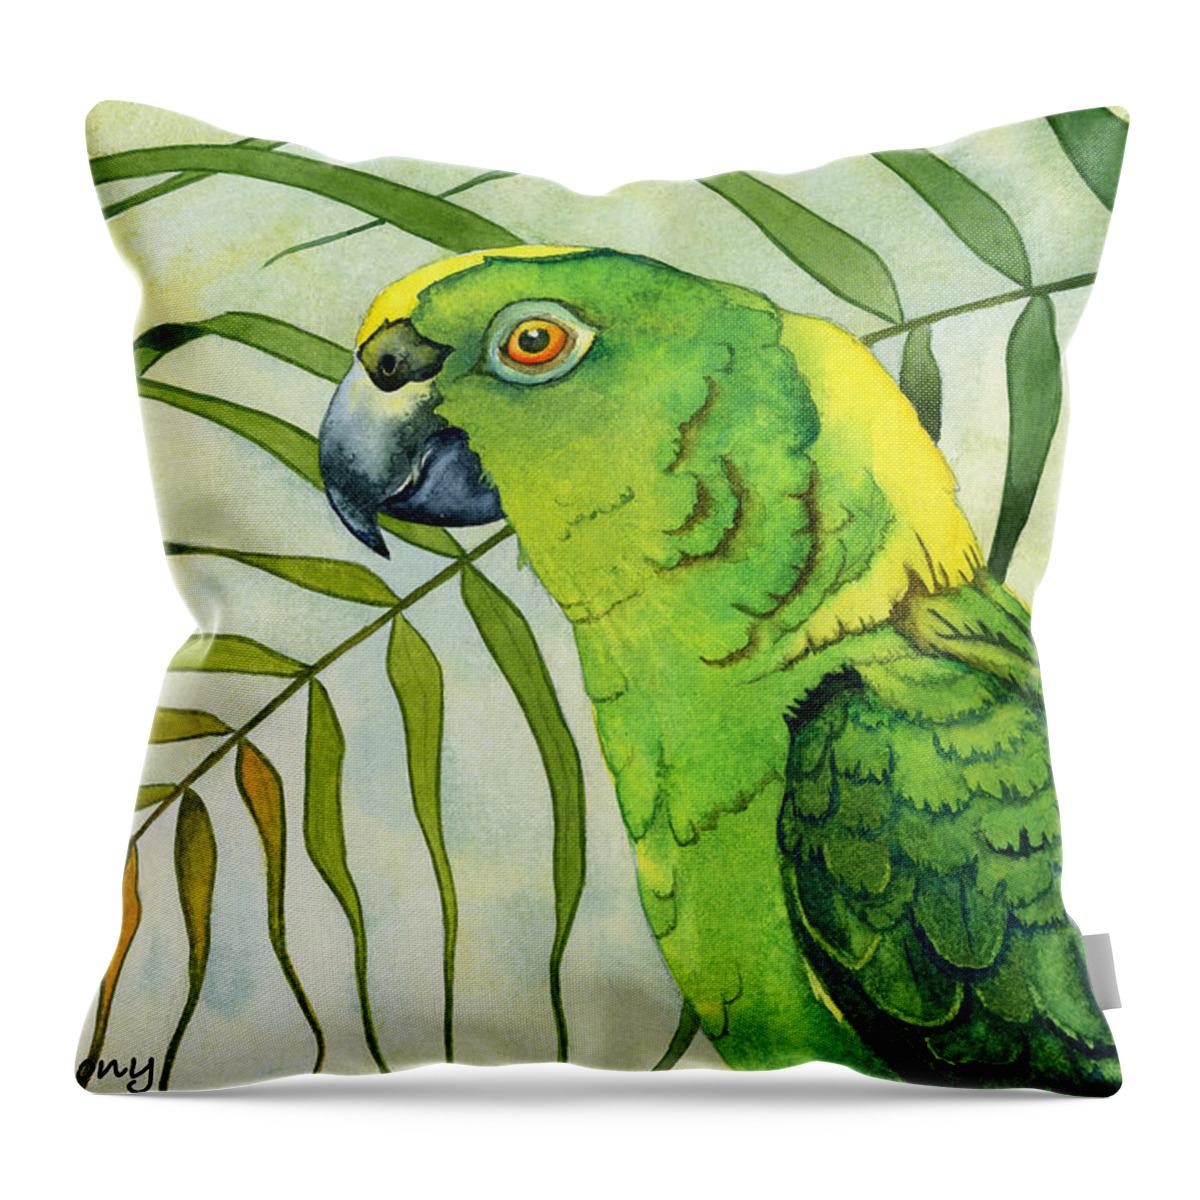 Watercolor Throw Pillow featuring the painting Amazon by Lyse Anthony